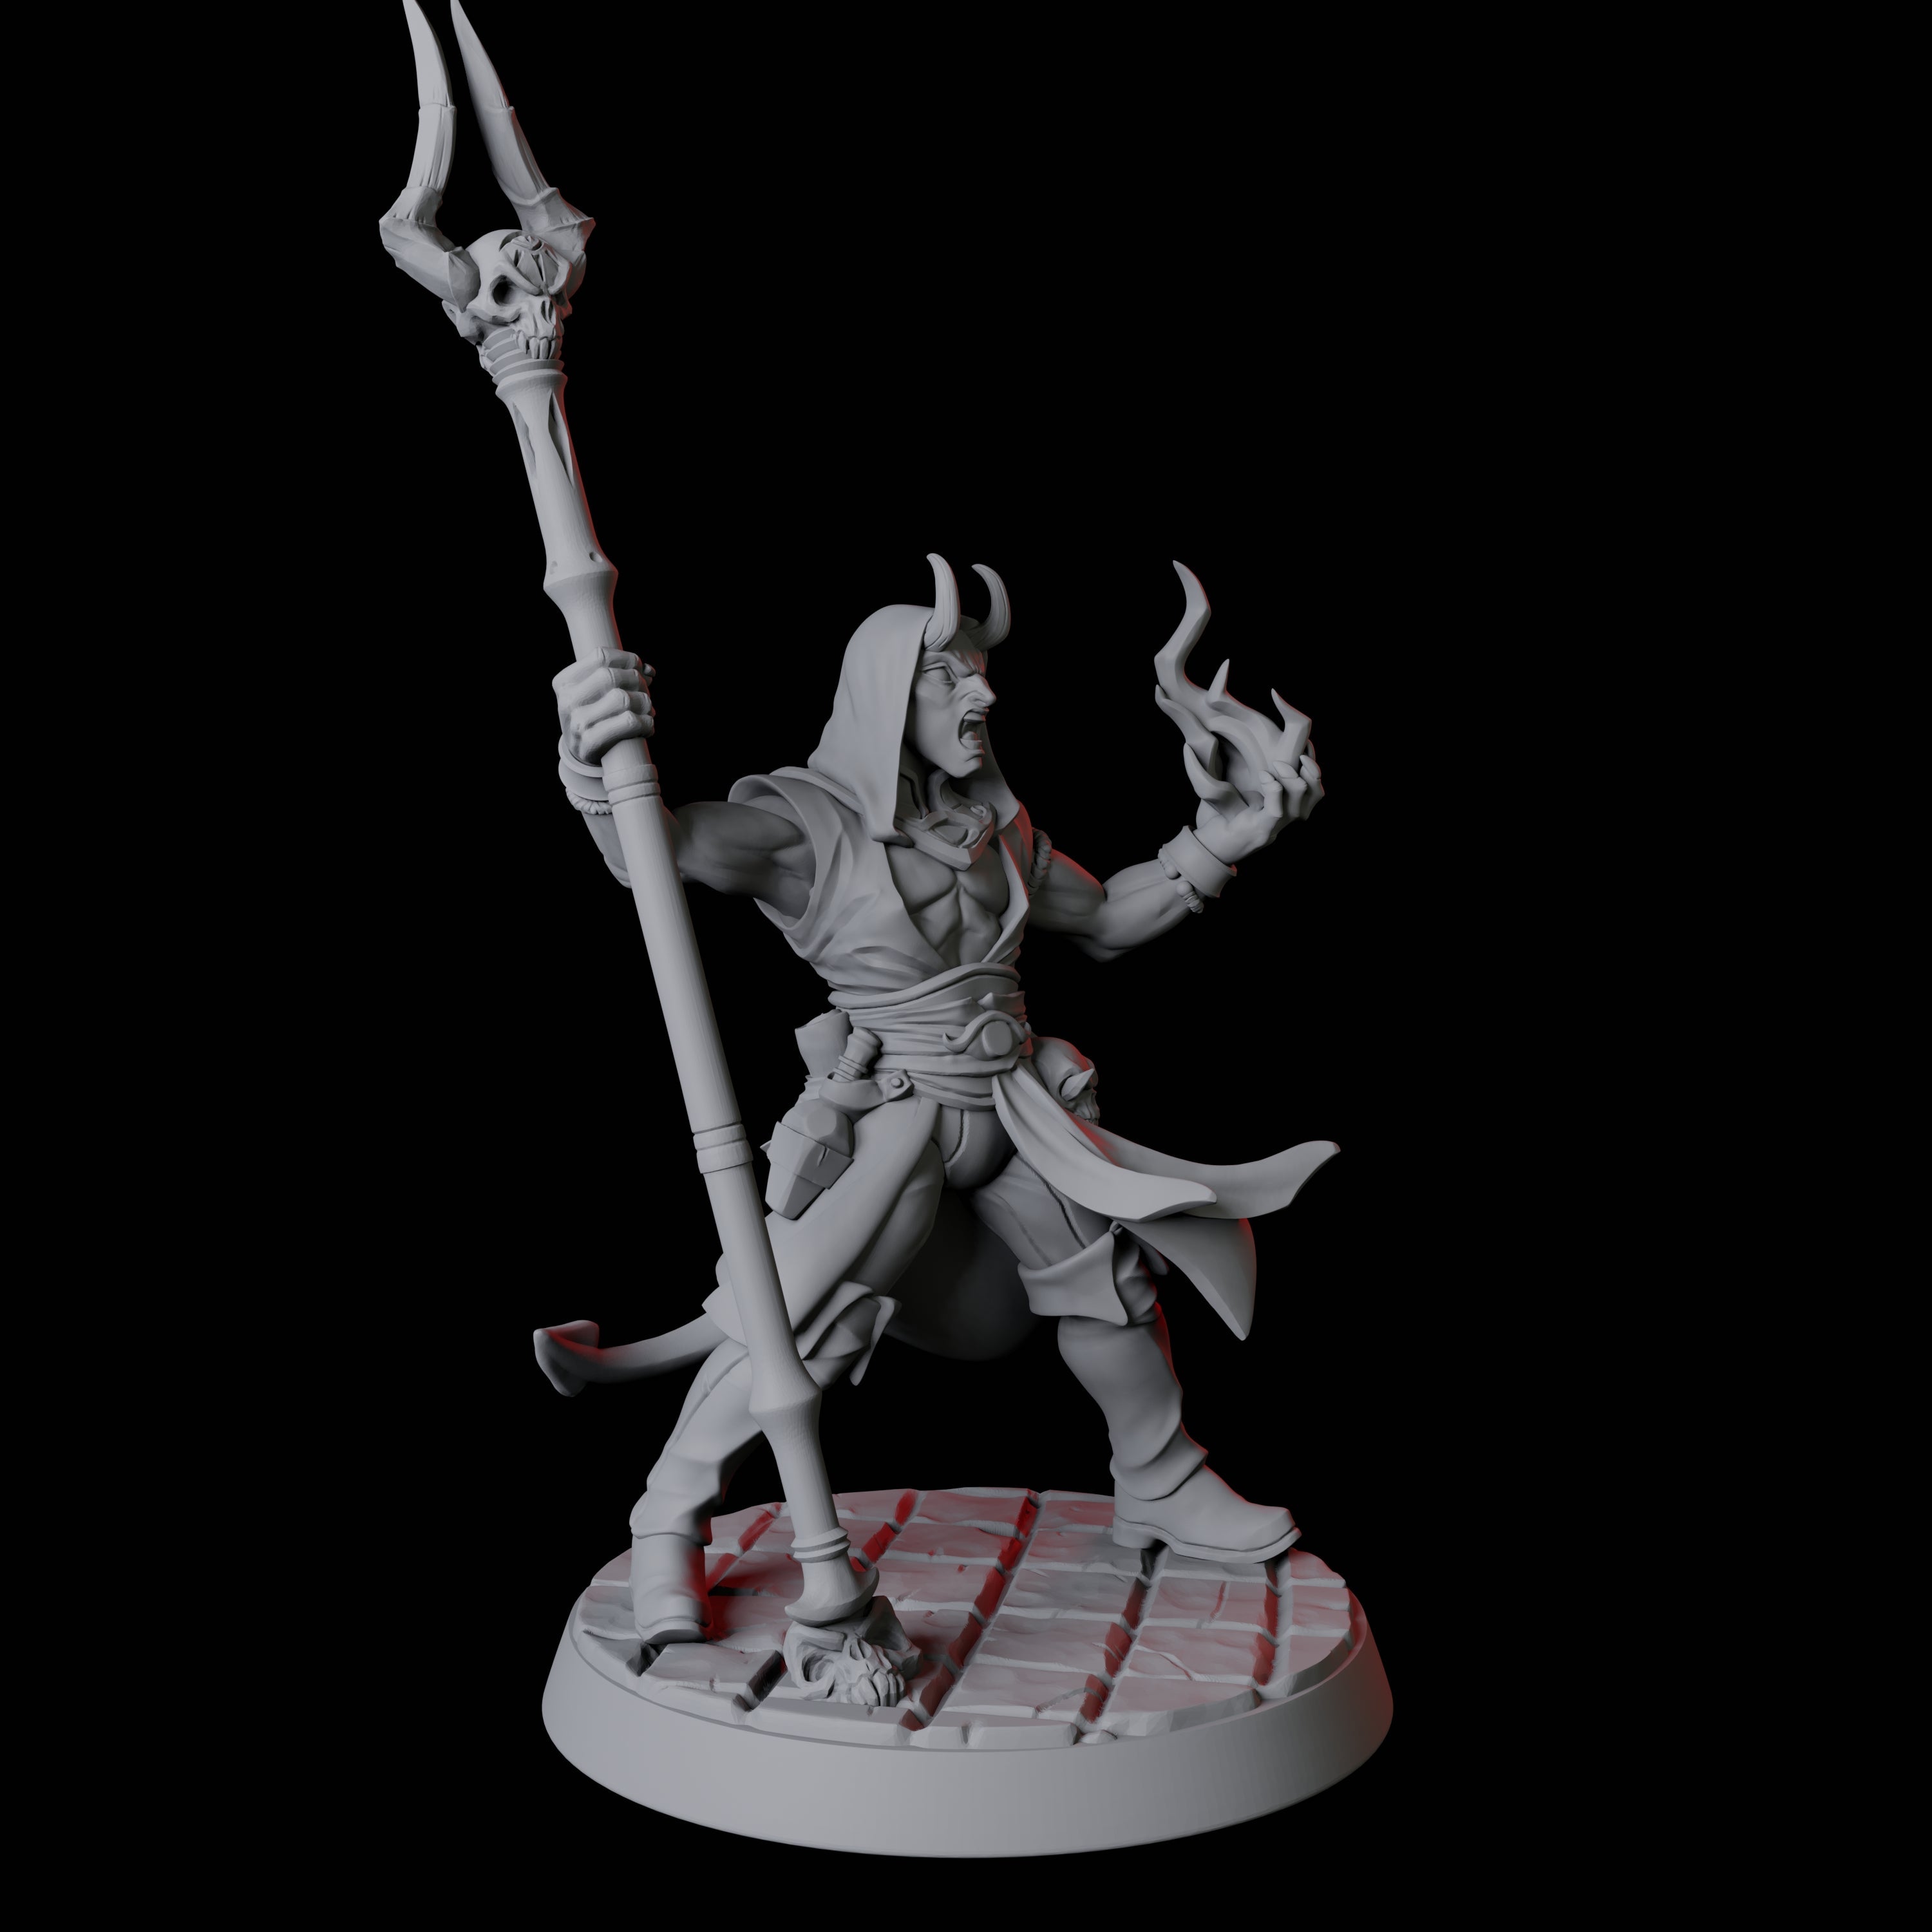 Tiefling Magic Caster C Miniature for Dungeons and Dragons, Pathfinder or other TTRPGs